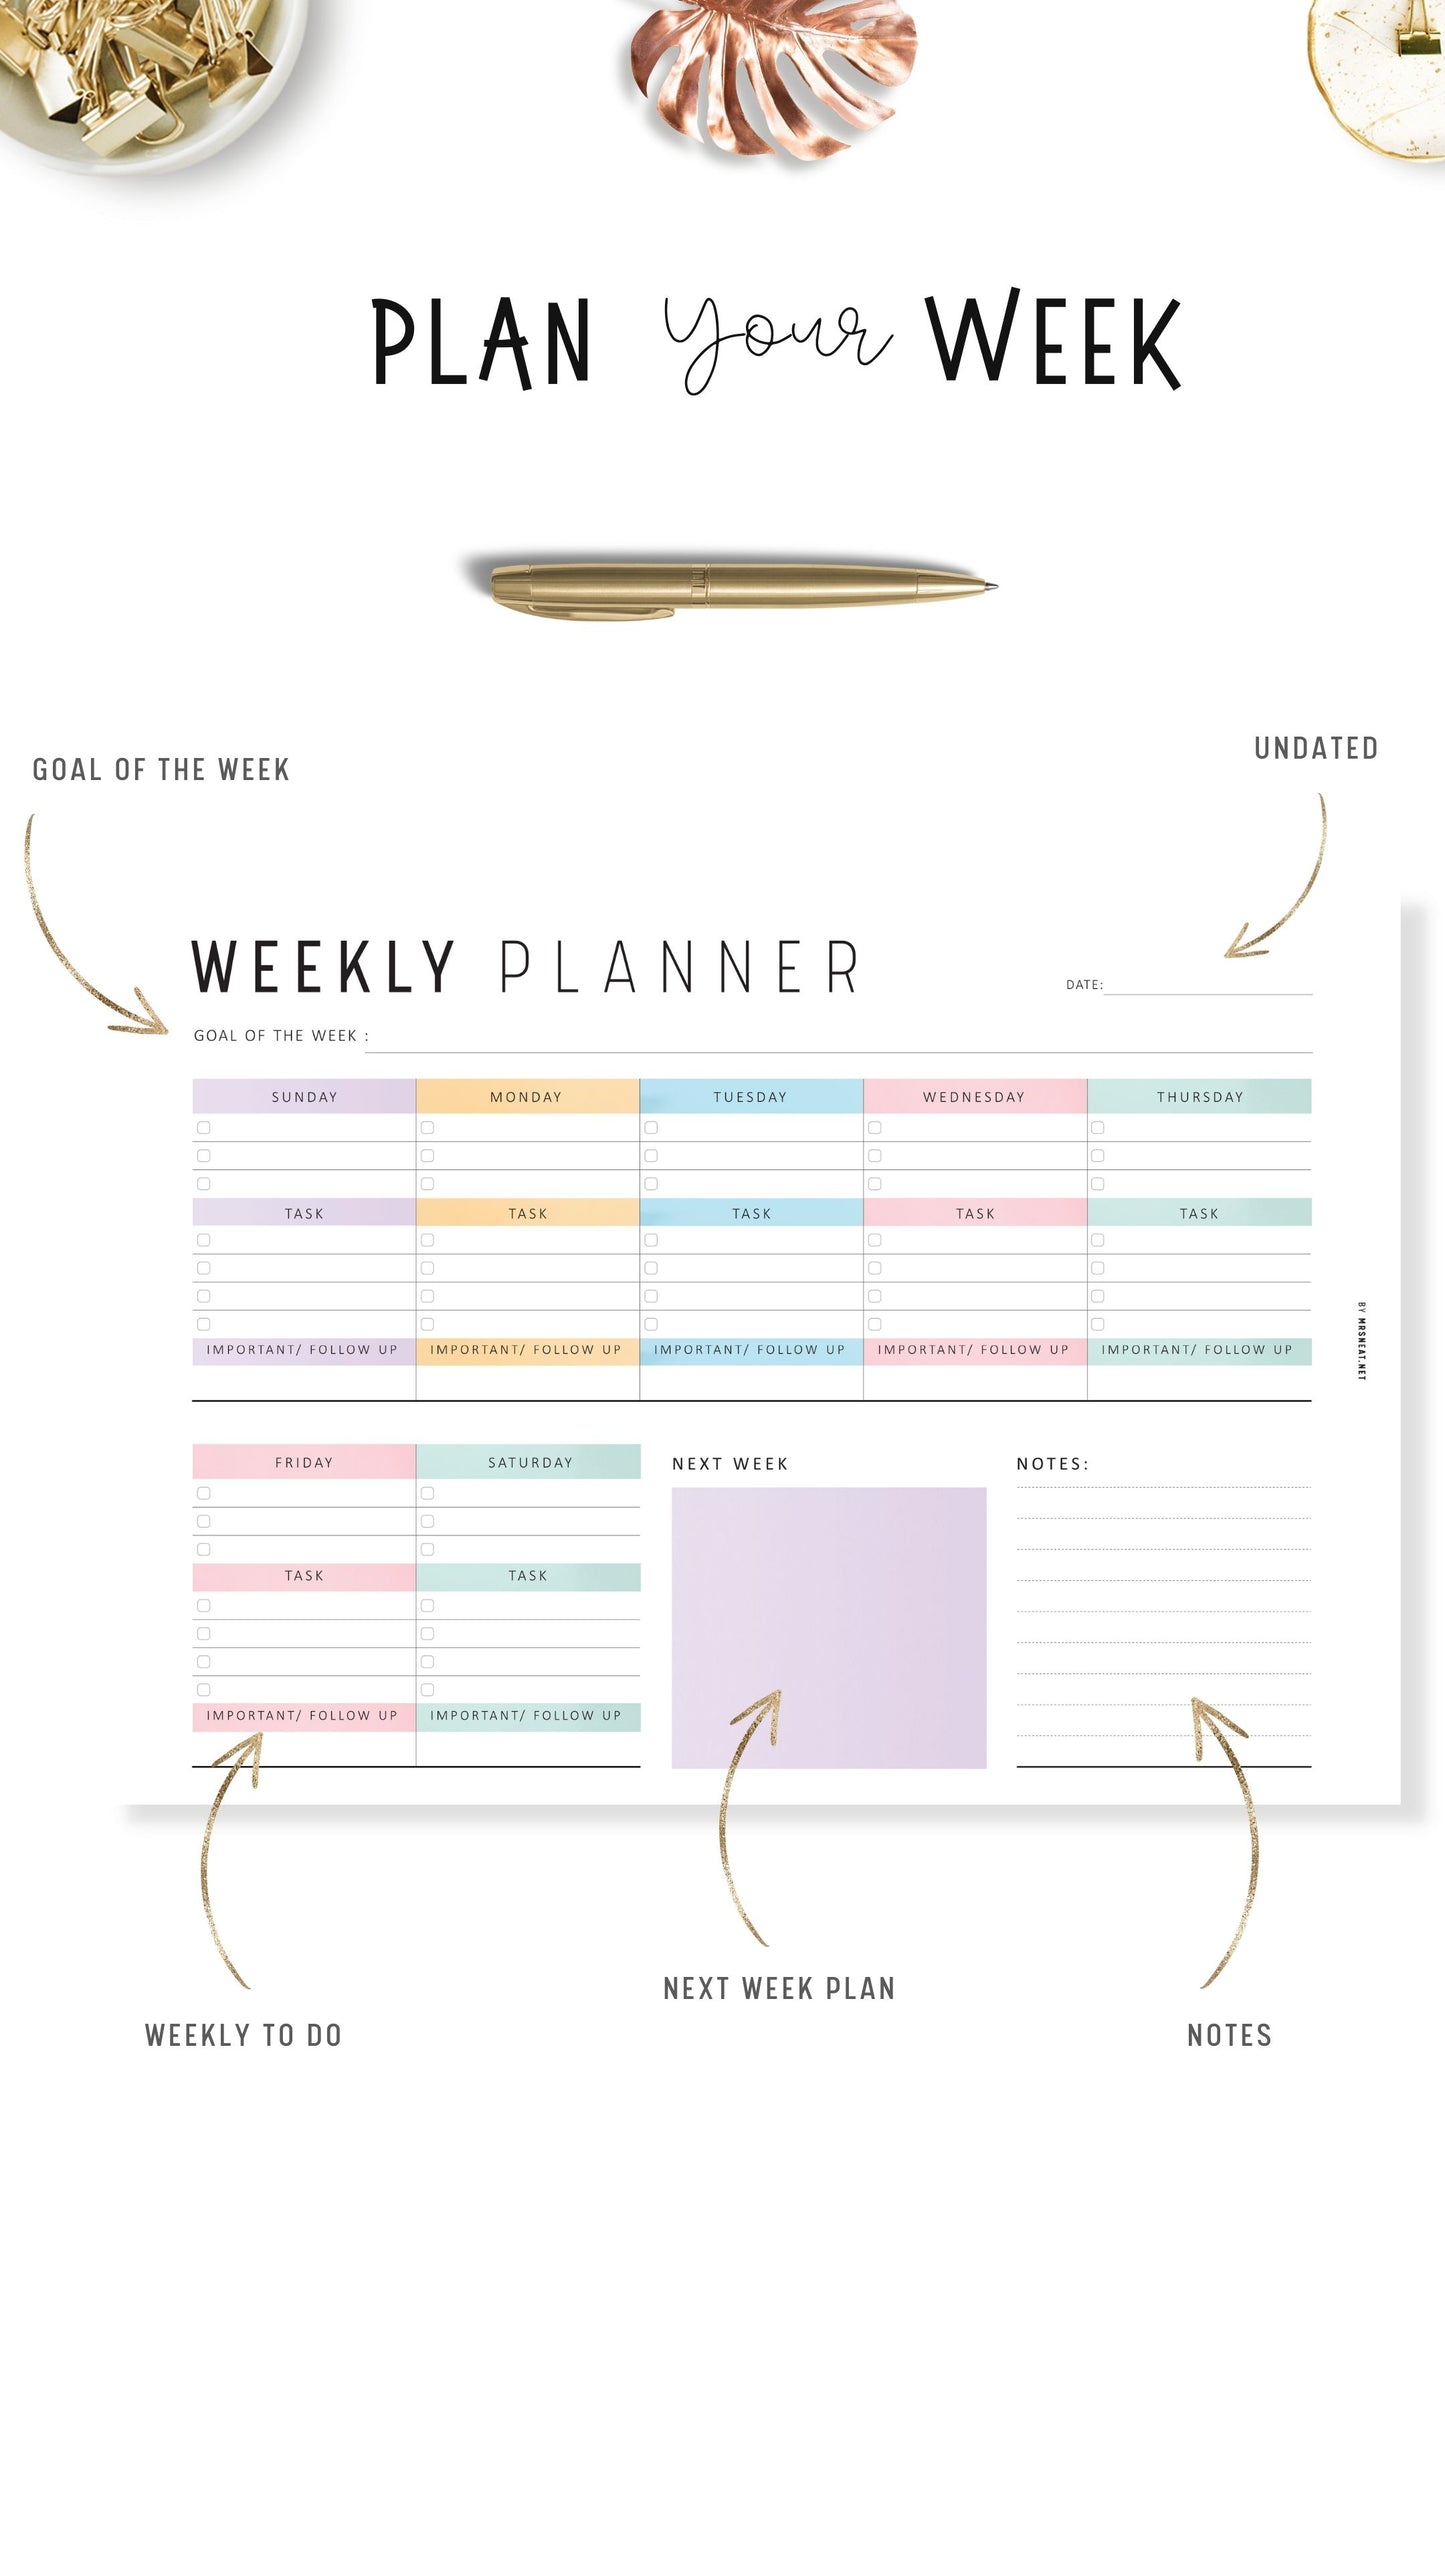 How to use Weekly Planner Landscape PDF